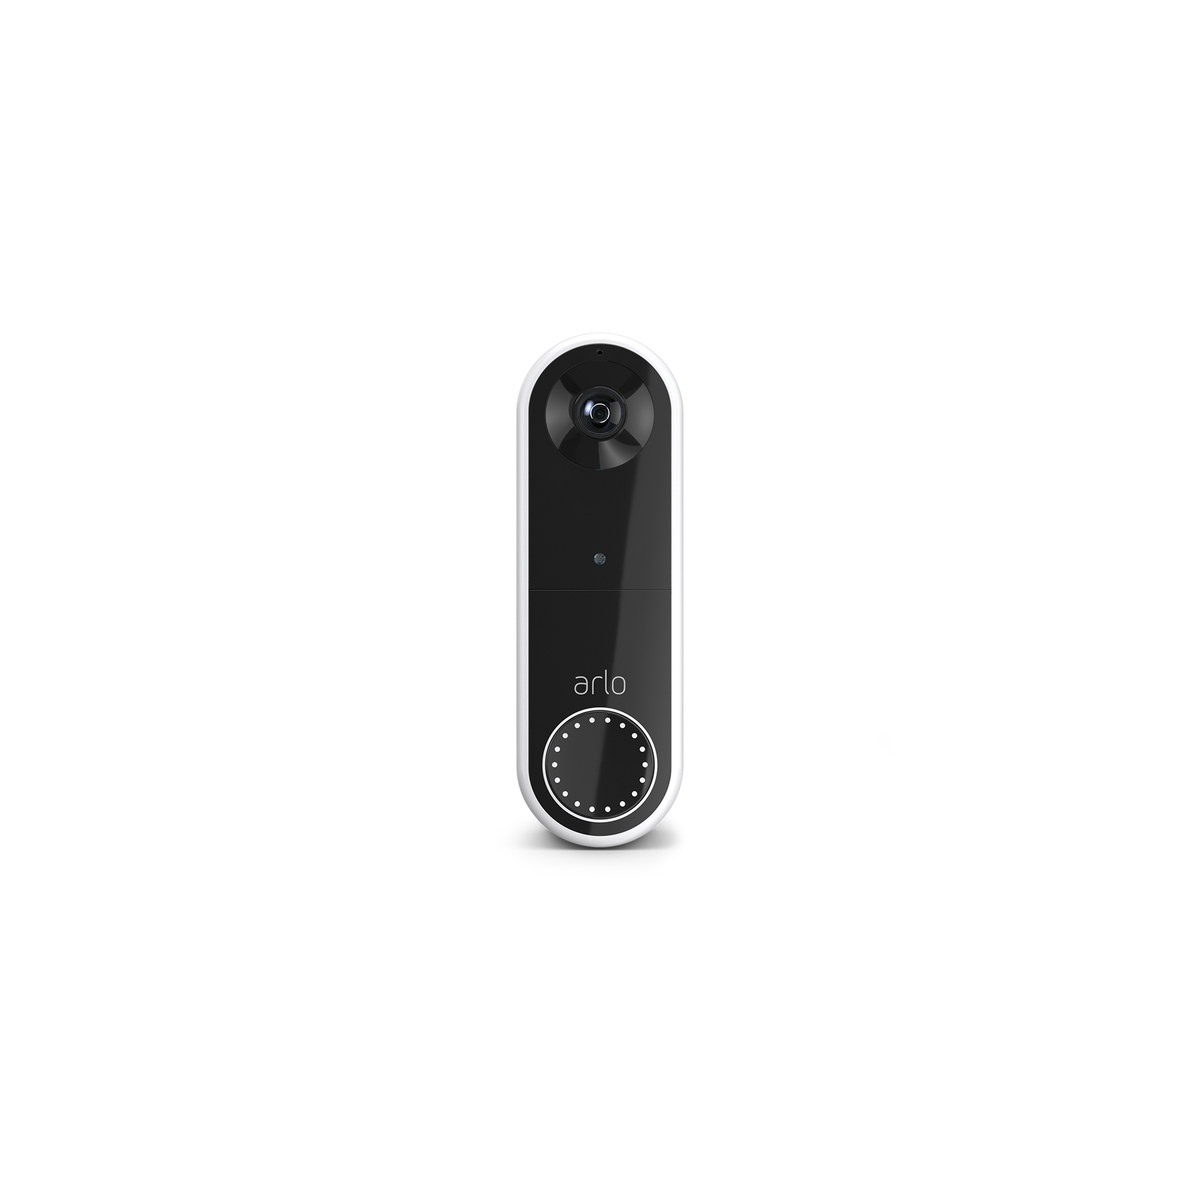 Arlo Essential Wire Free Video Doorbell Kit with Chime 2 - White | AVDK2001100UKS from Arlo - DID Electrical